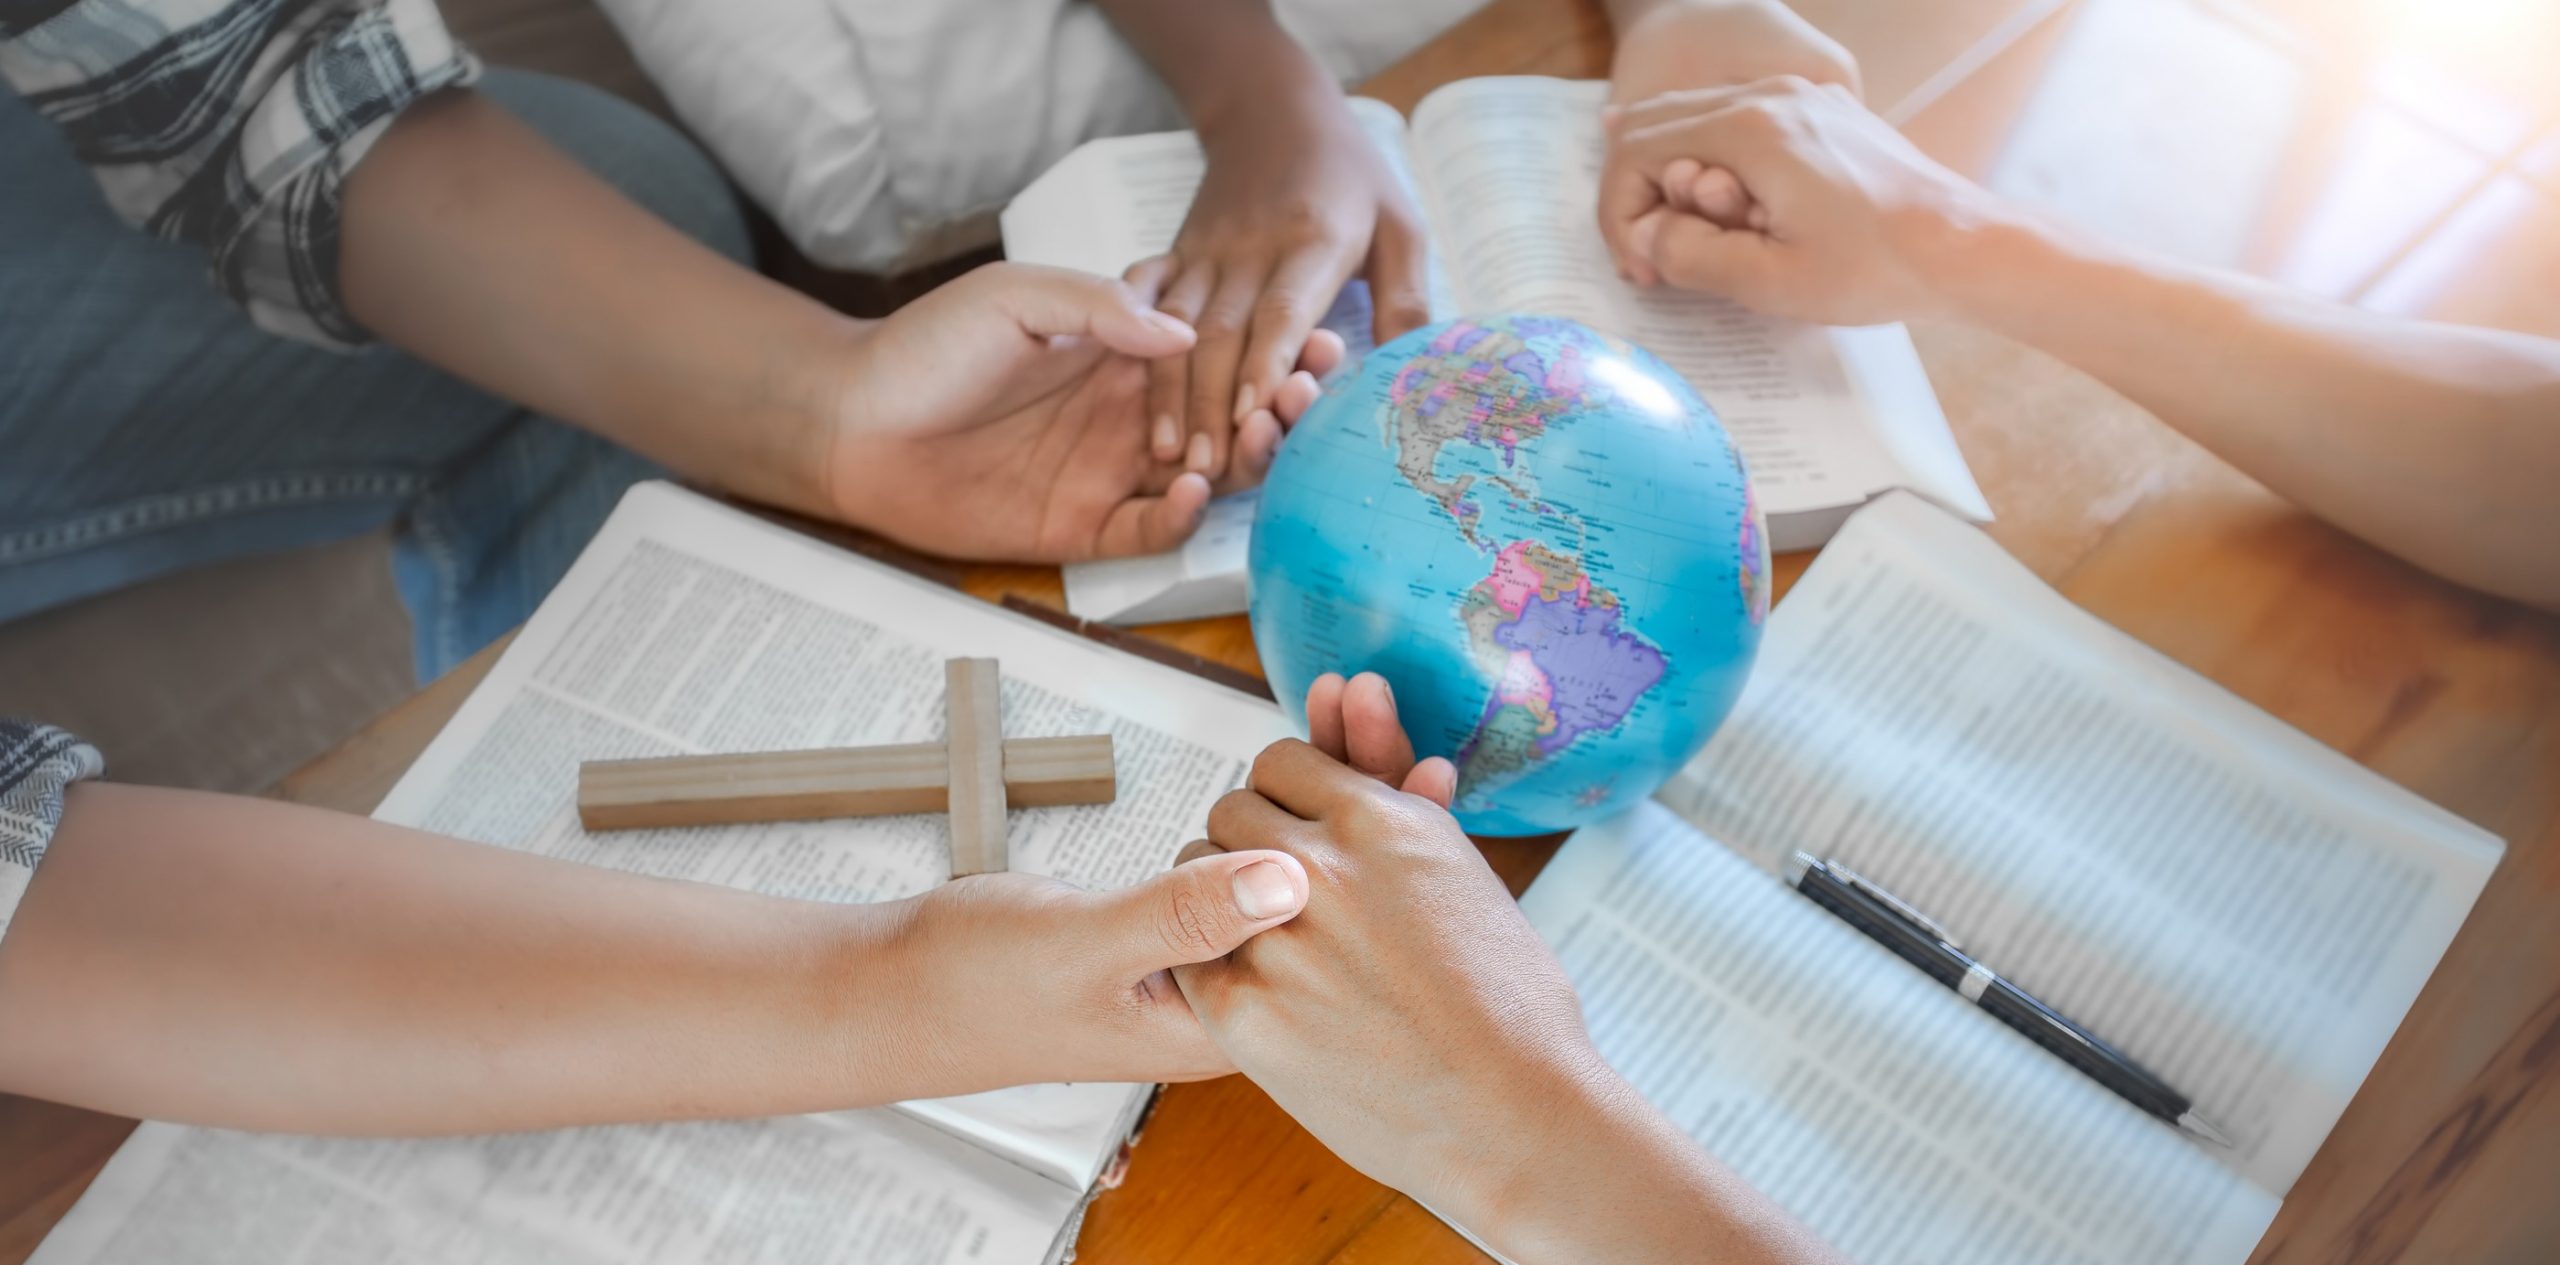 Christian group praying for globe and people around the world on wooden table with bible.